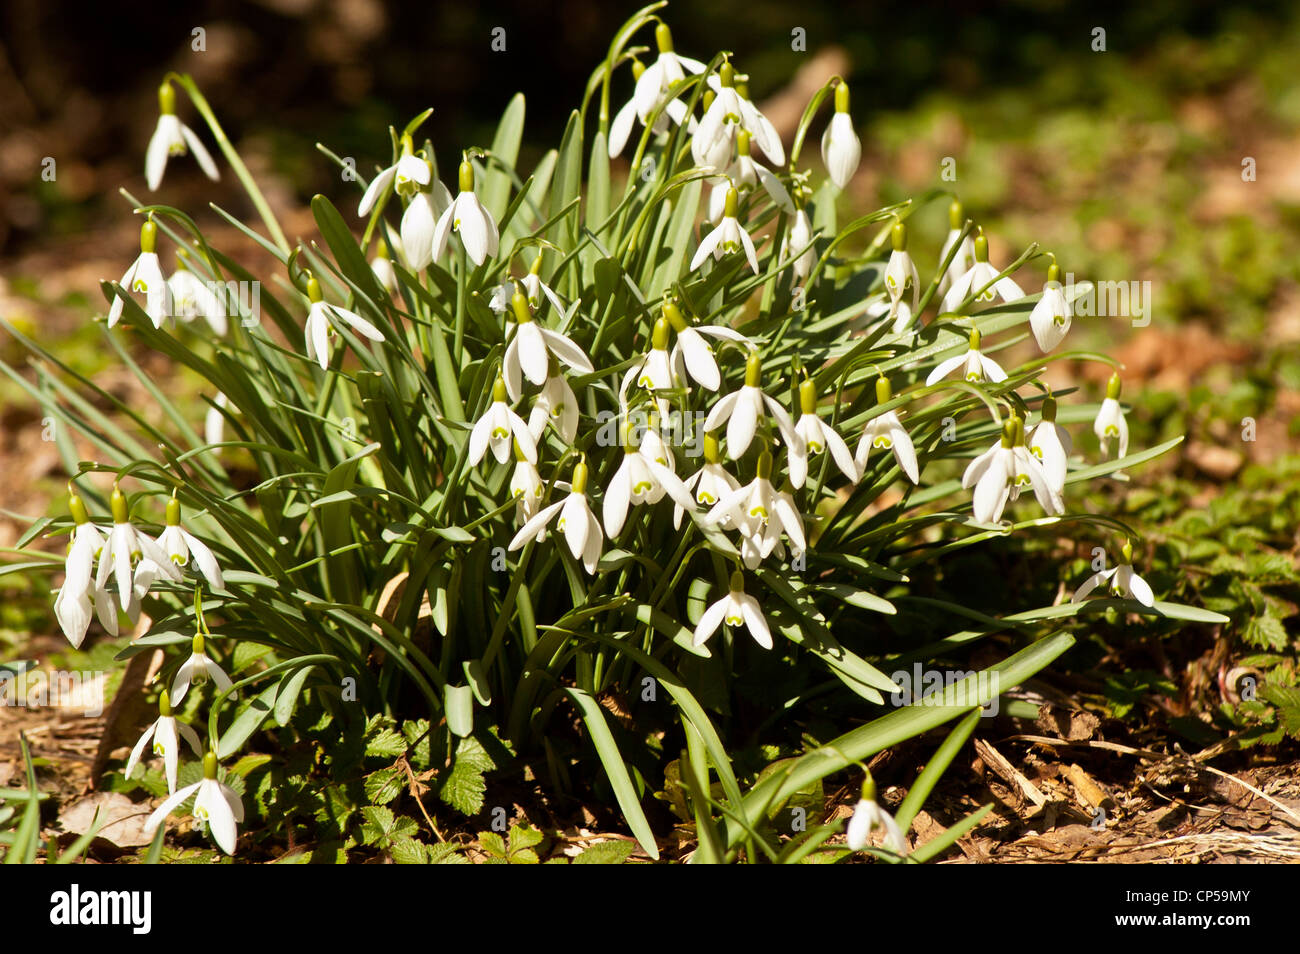 Group of Common snowdrops, Galanthus nivalis growing on the lawn in early Spring Stock Photo